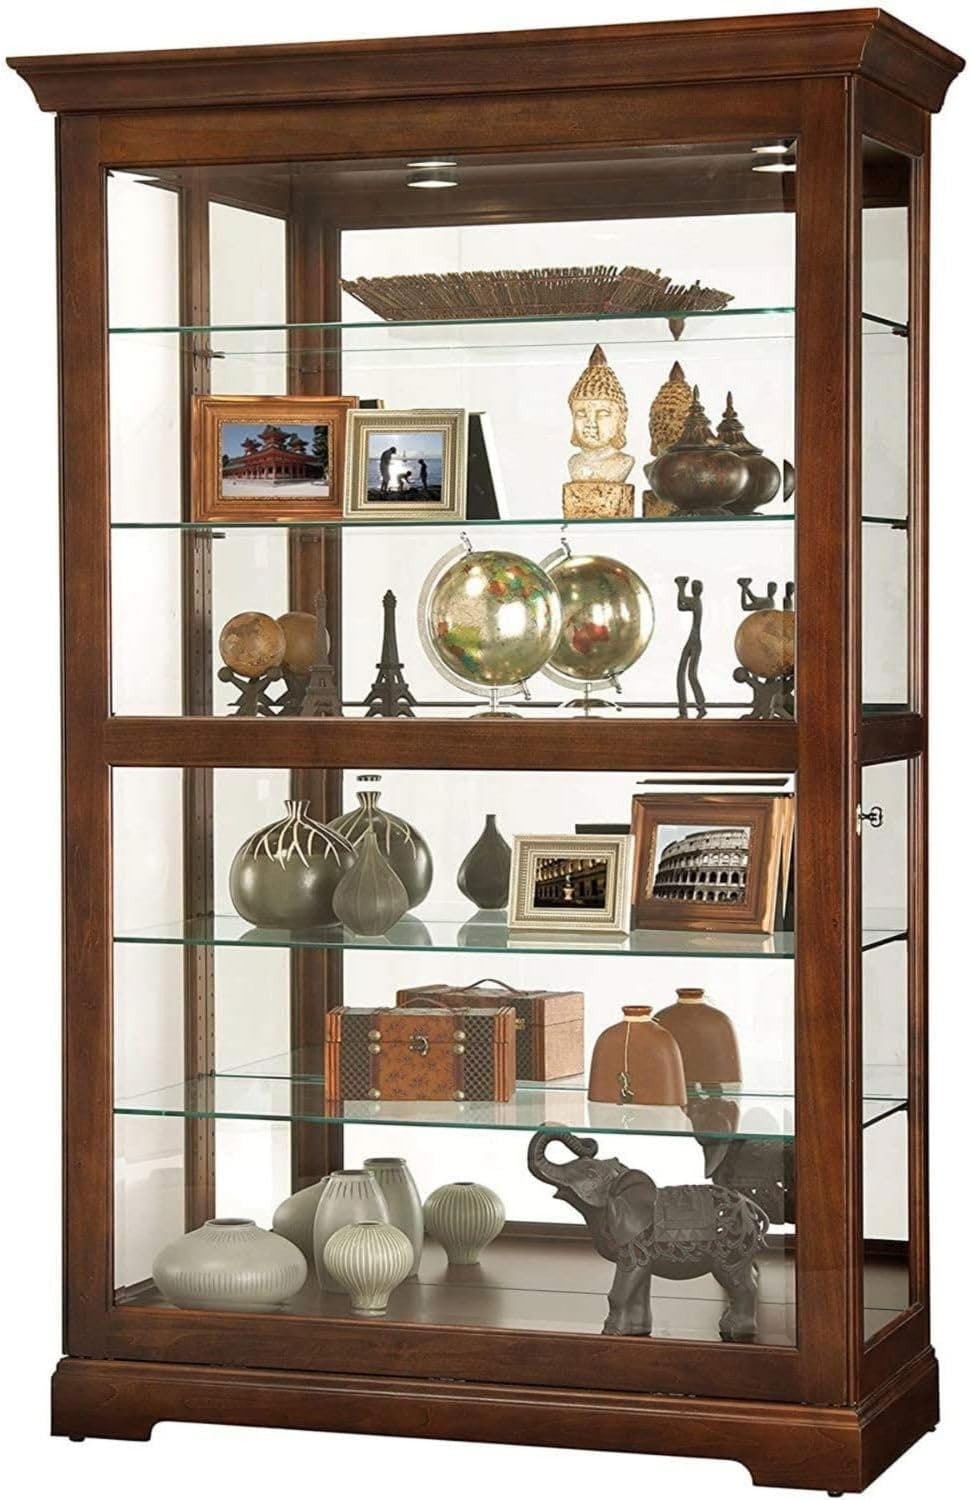 Cherry Bordeaux Traditional Corner Curio Cabinet with Lighting